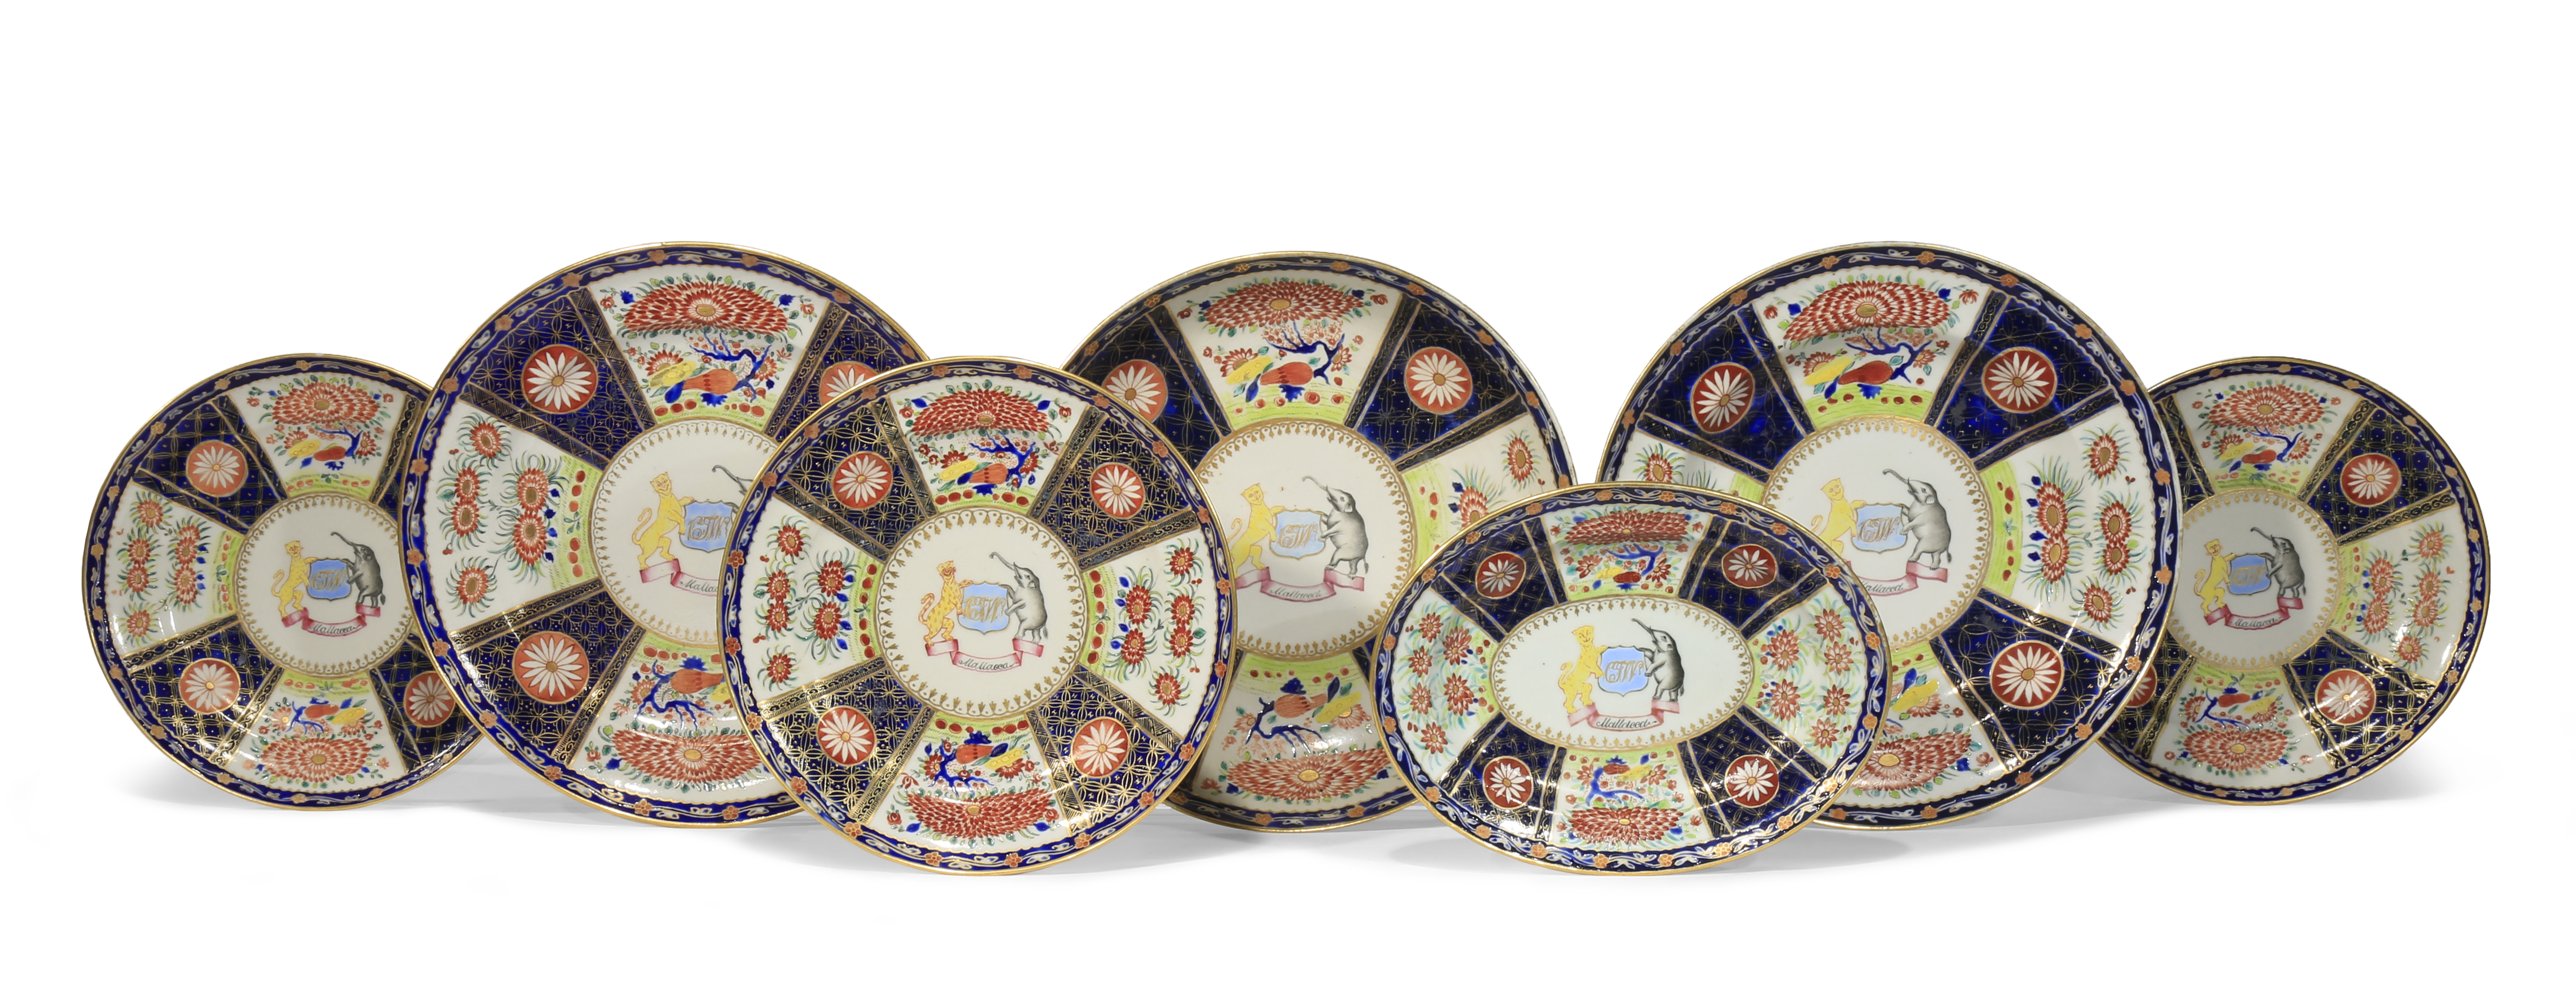 SEVEN CHINESE ARMORIAL DISHES FROM THE WOLTERBEEK SERVICE C.1818 Comprising: six circular dishes and - Image 2 of 2